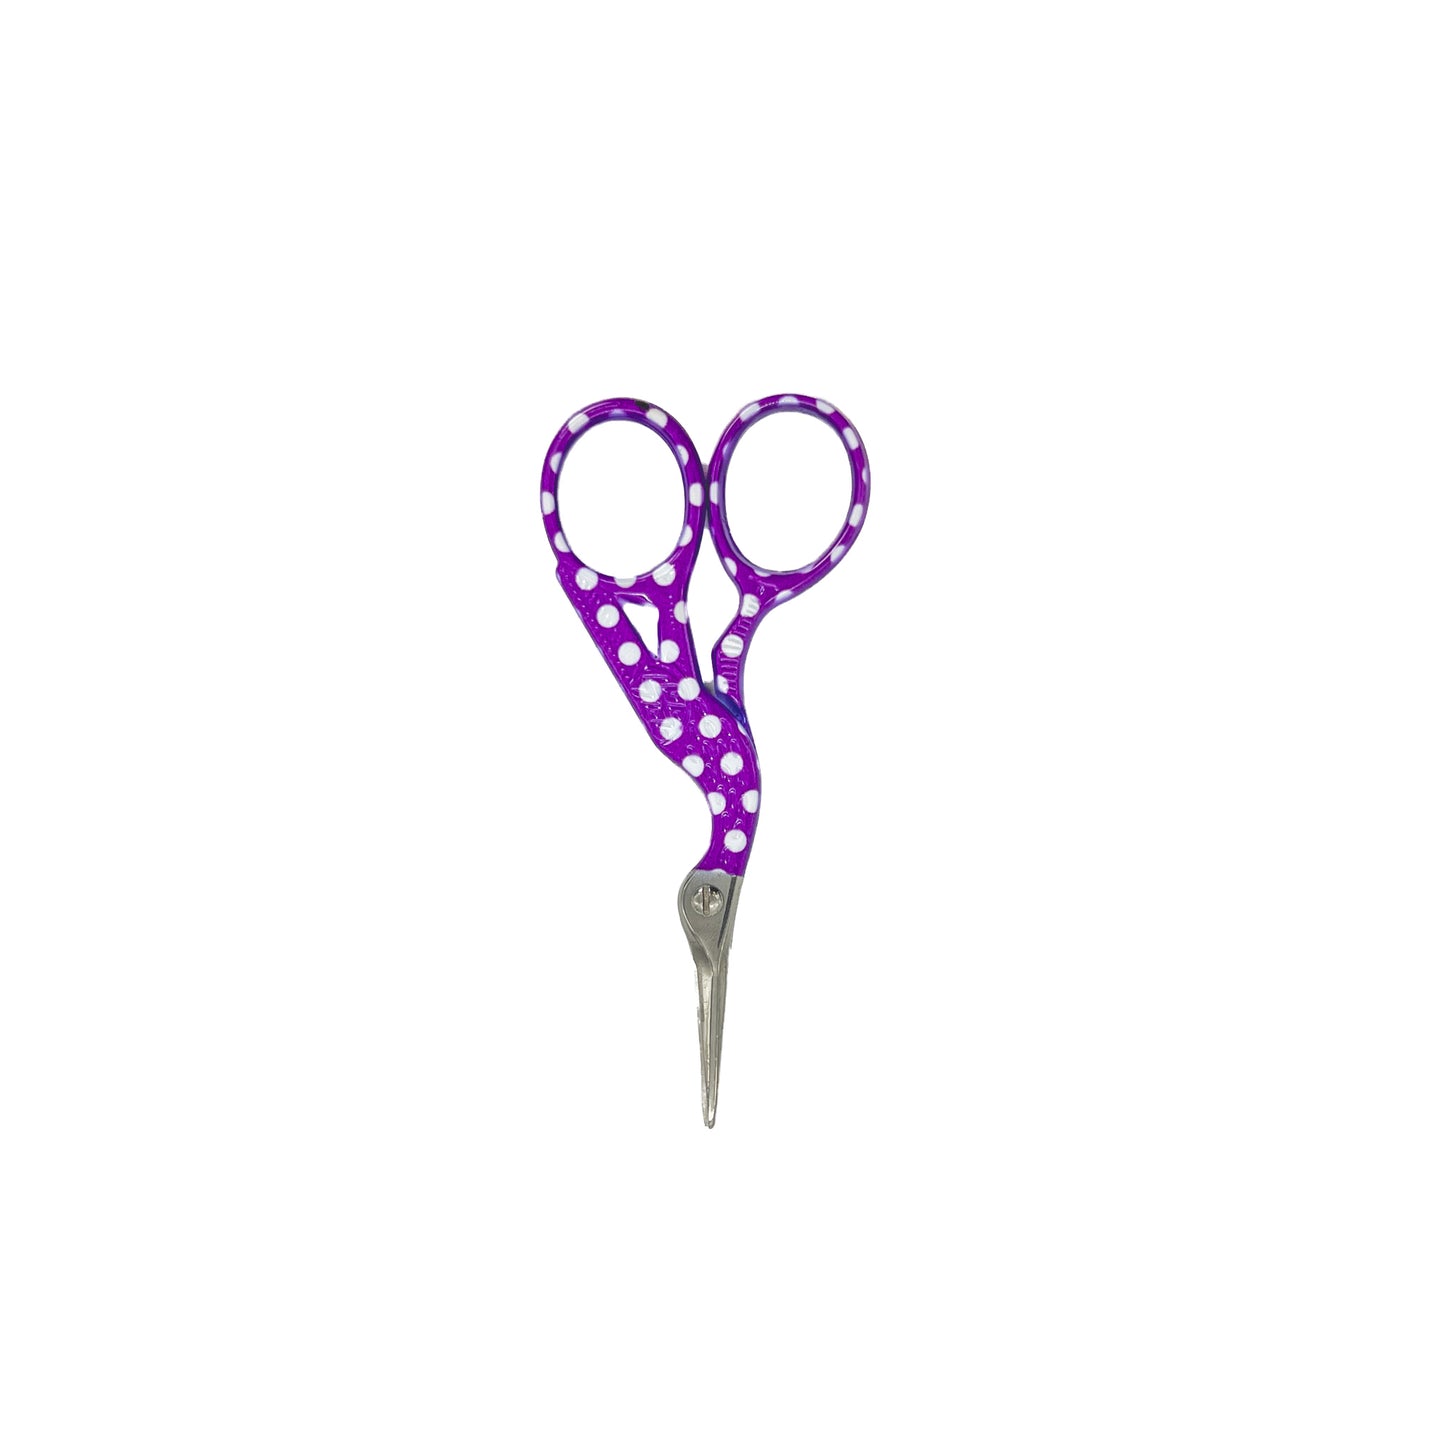 A pair of purple polka dot crafting scissors on a white background.